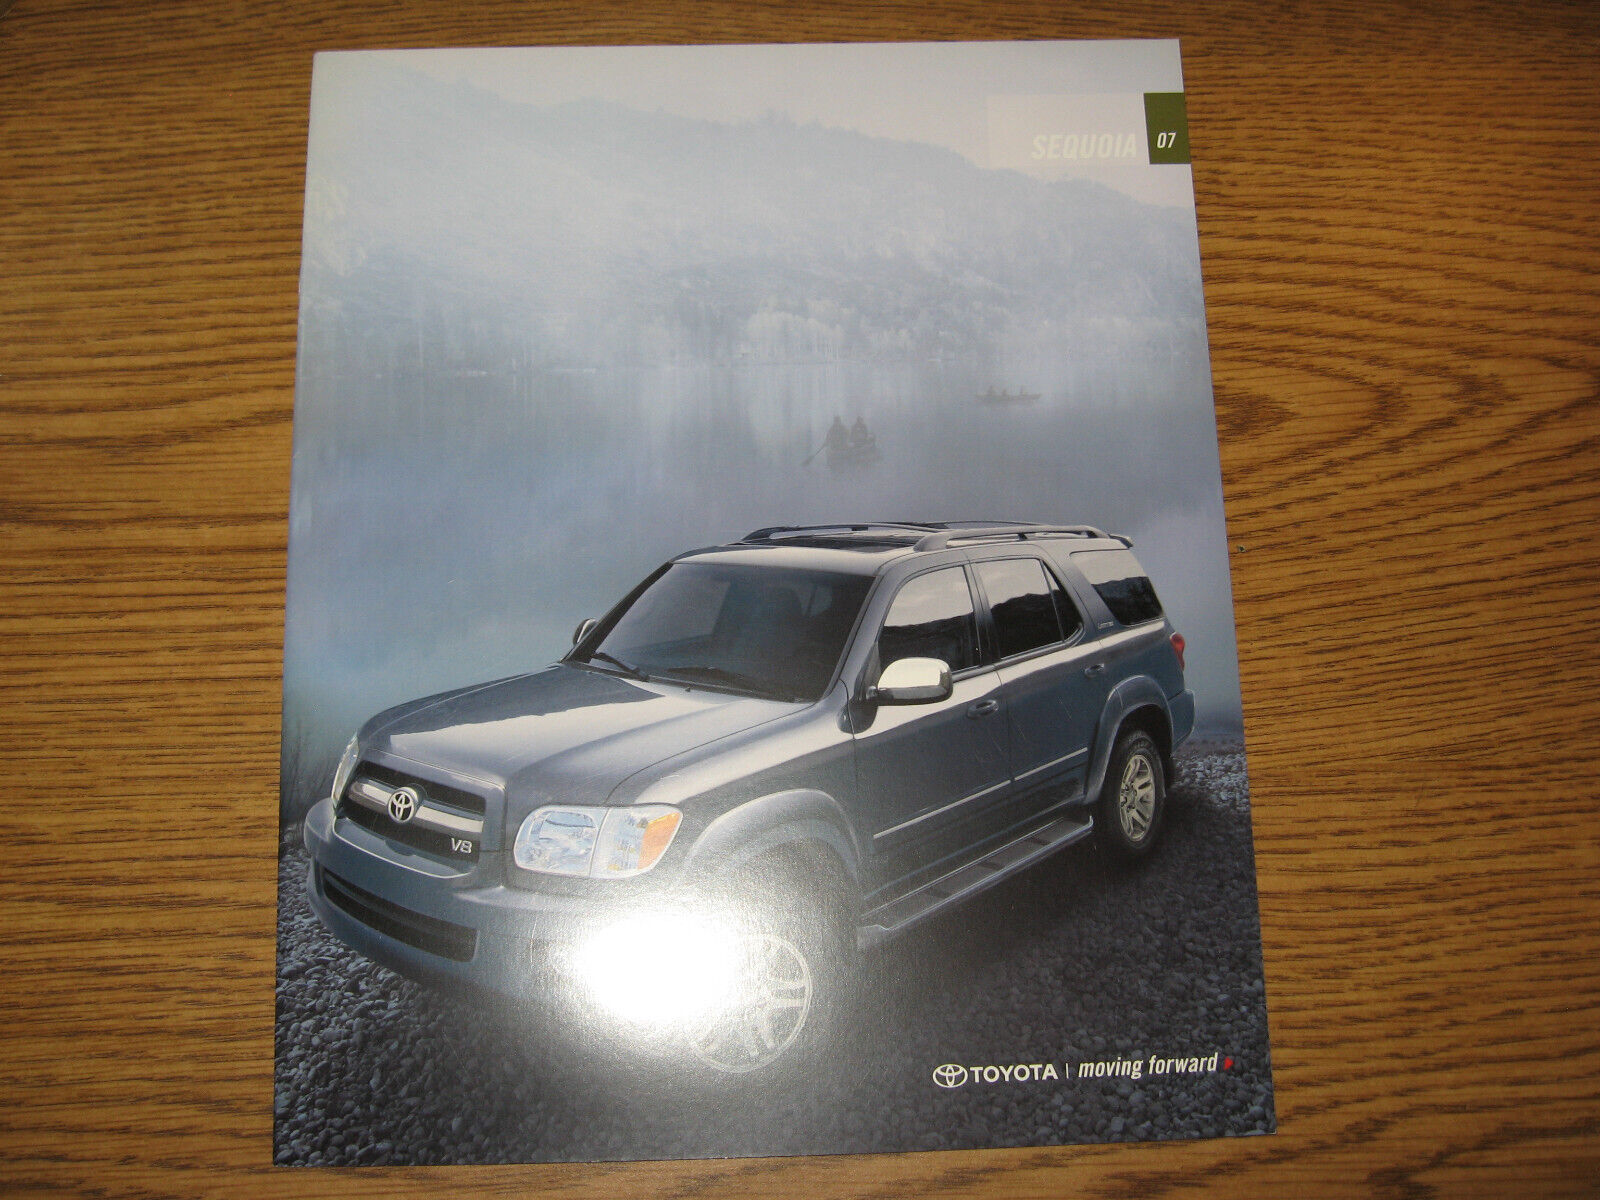 2007 Toyota Sequoia brochure 12 color pages SR5 & Limited